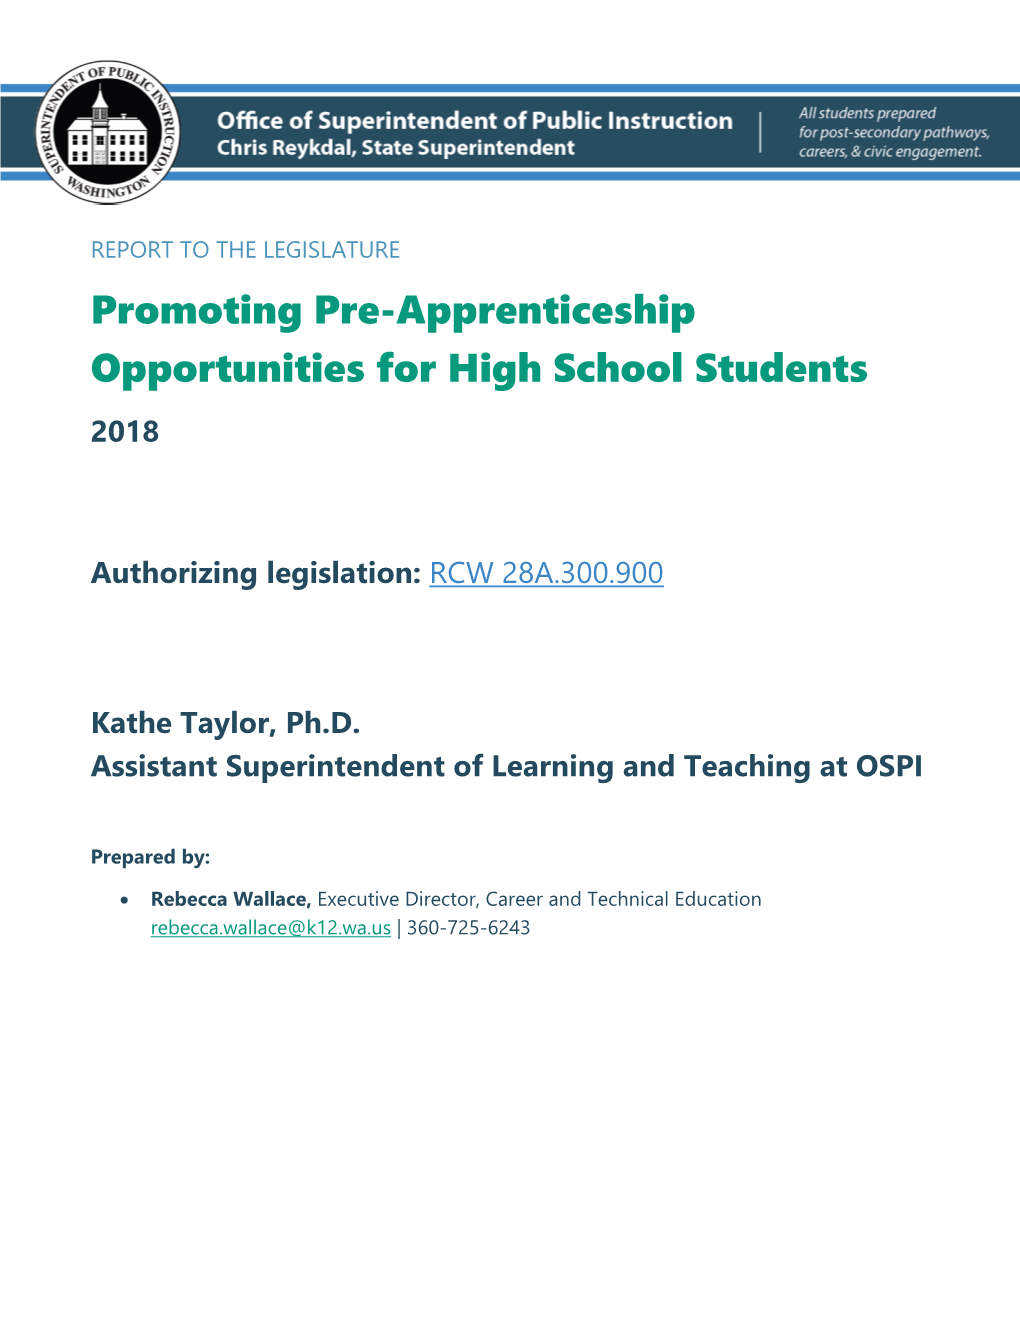 Promoting Pre-Apprenticeship Opportunities for High School Students 2018